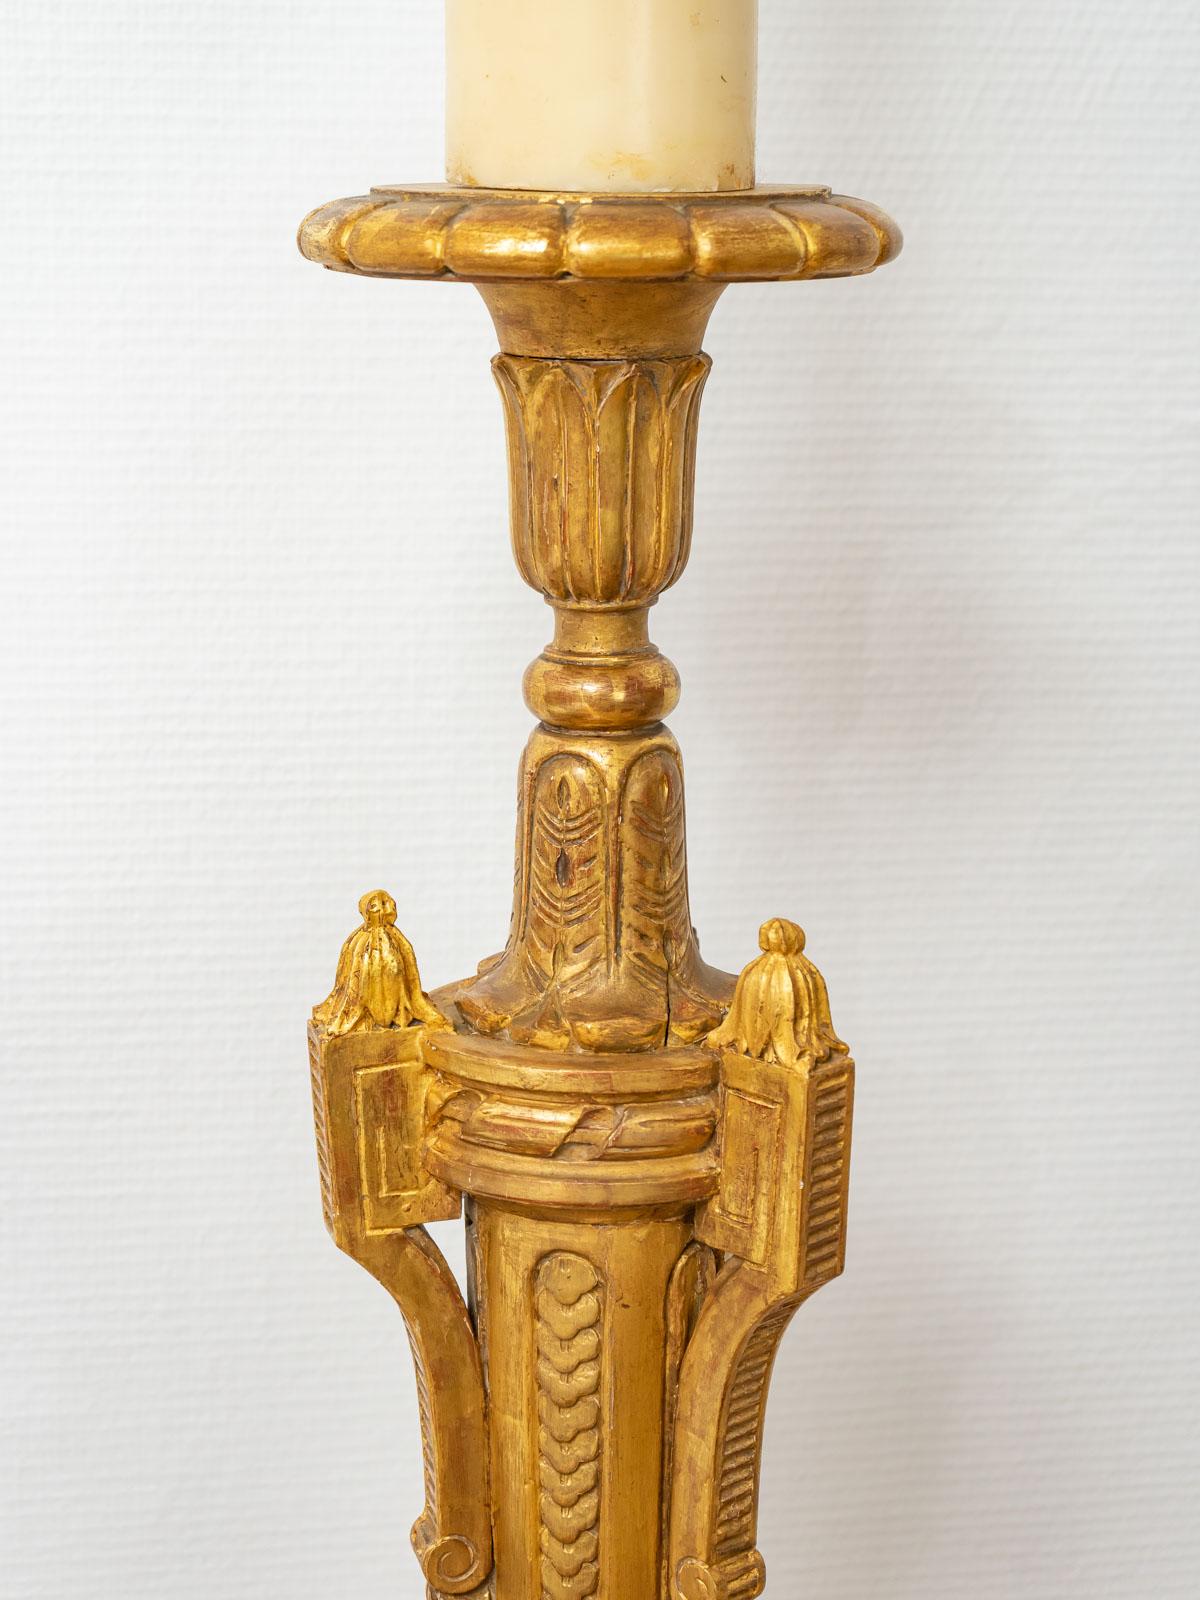 Large carved and gilded wooden candlestick, decorated with foliage, gadroons and acanthus leaves resting on a tripod base.
This sumptuous piece has been restored in our workshops and entirely gilded with 24 carat gold leaf.

Period: 19th